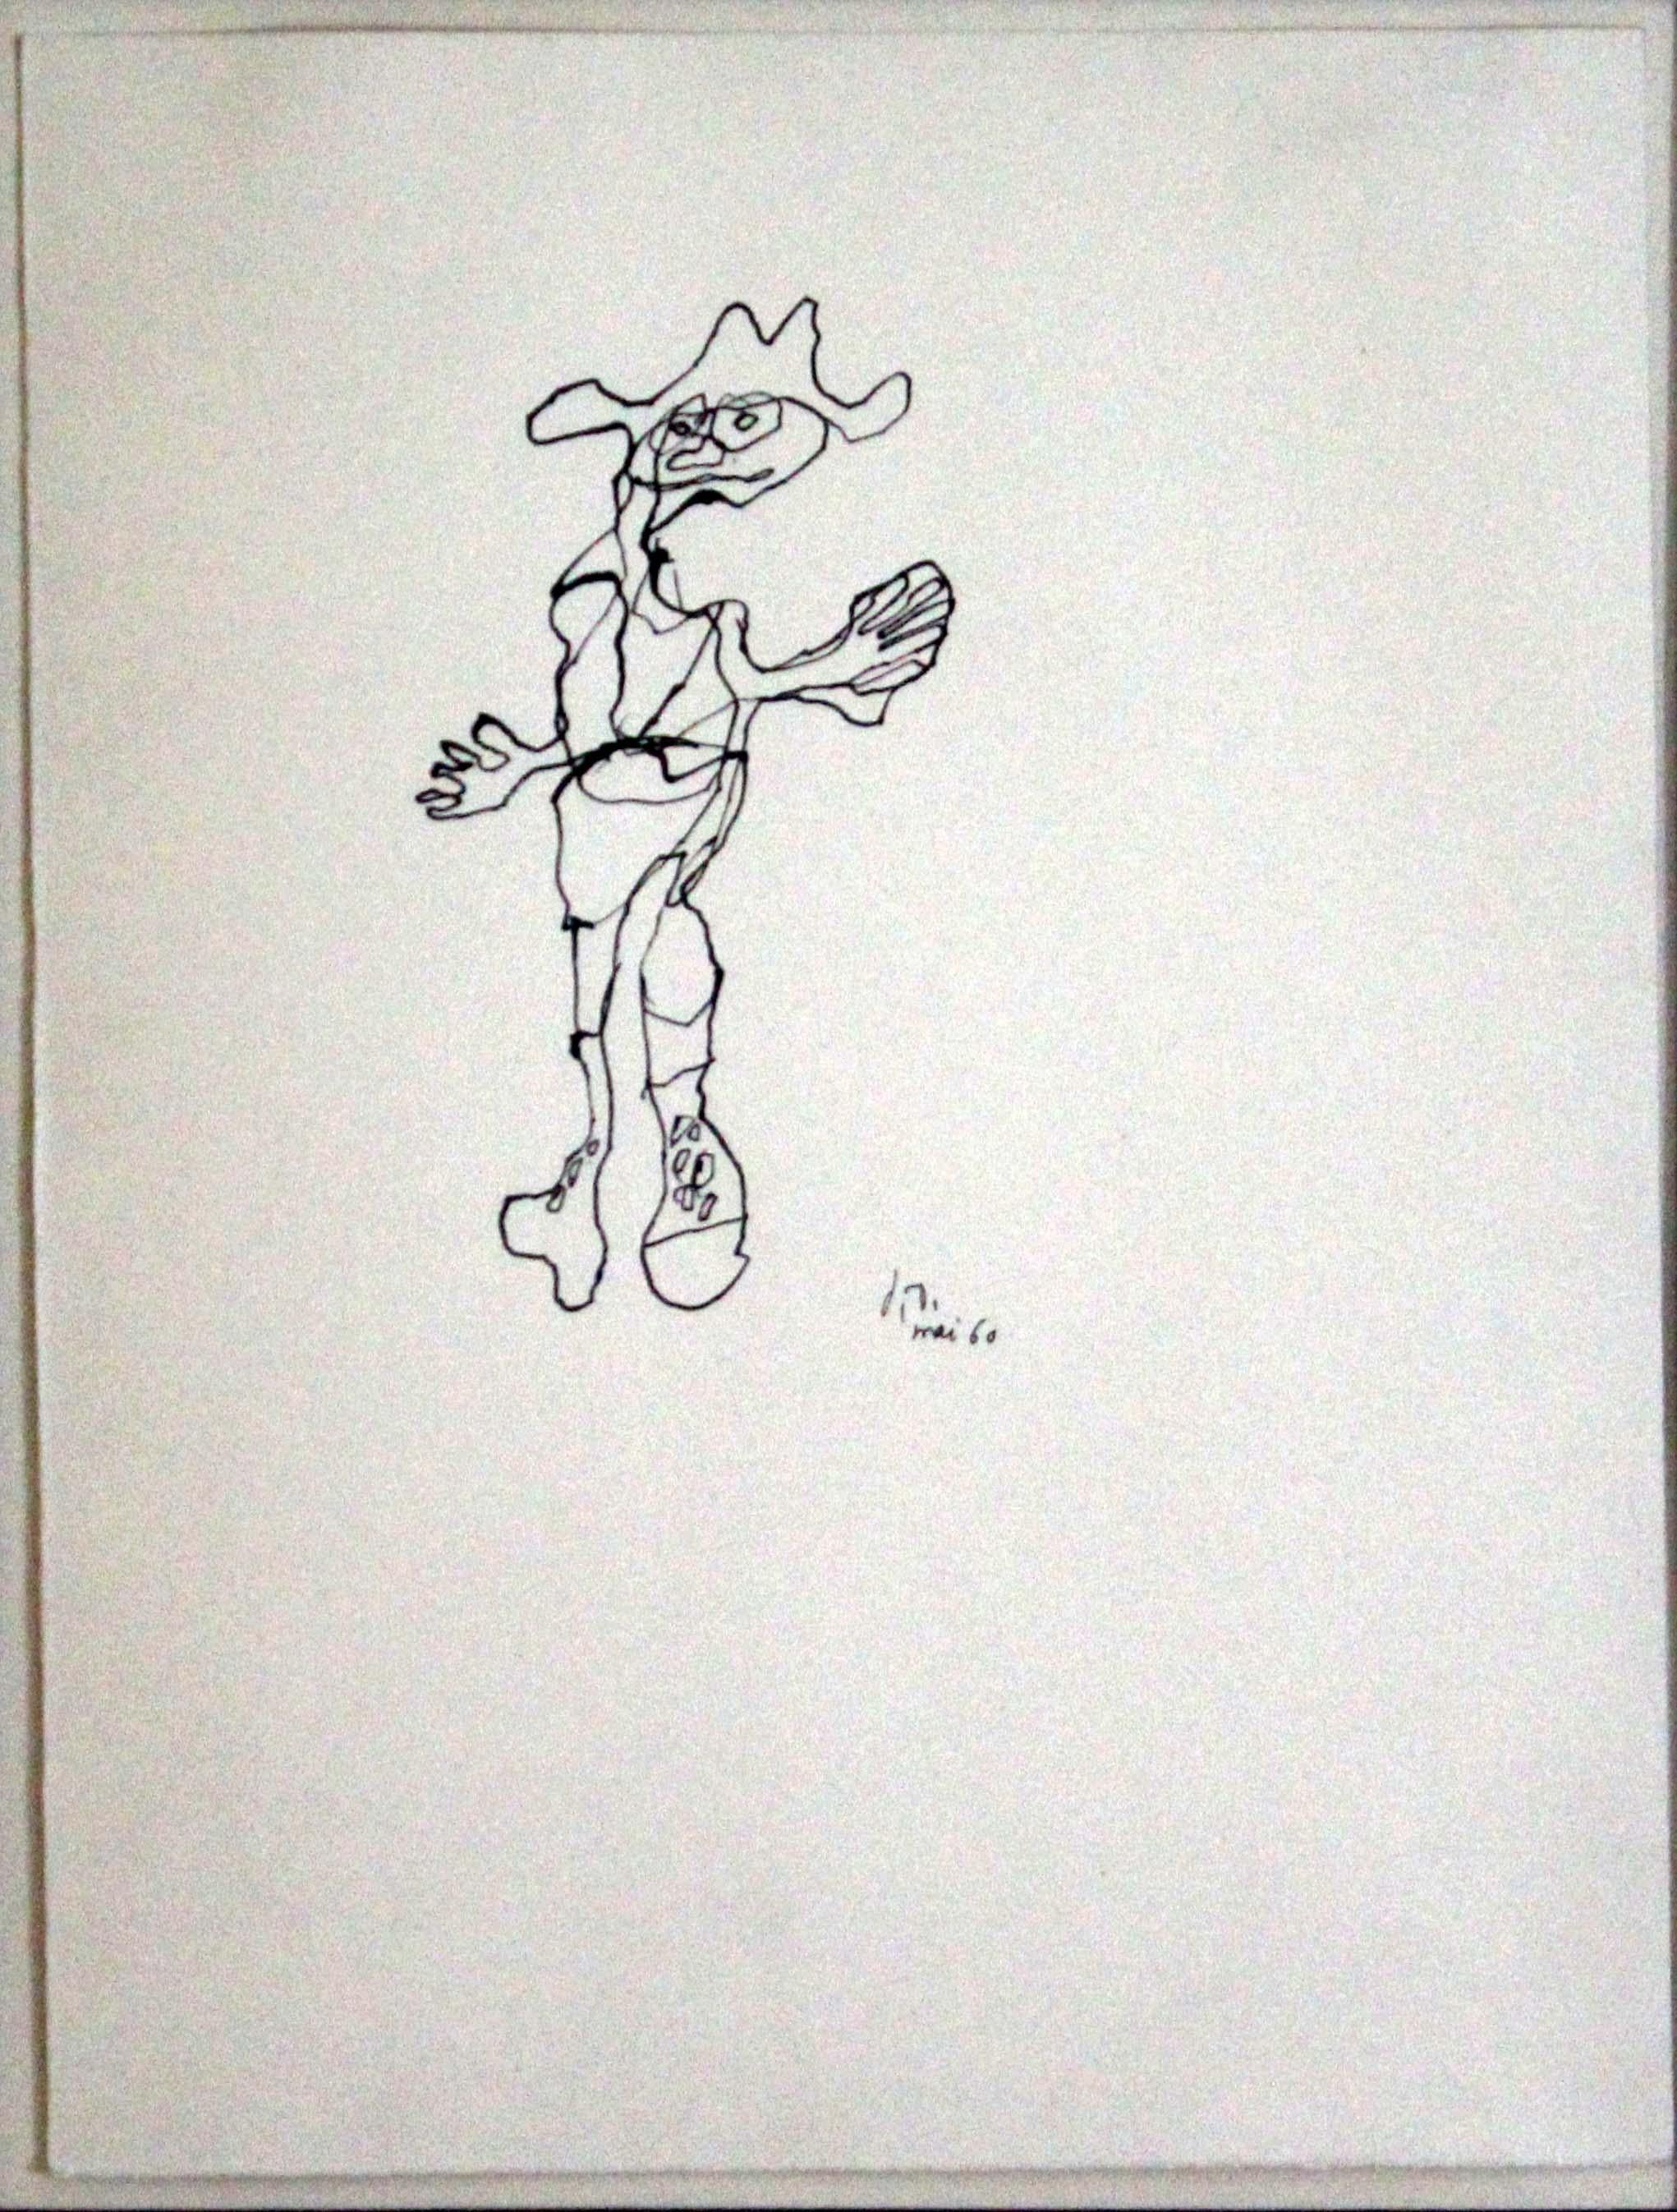 A rare delightful and expressive ink drawing on paper titled Petit Personnage (Little Characters) by French artist Jean Dubuffet. Signed on the bottom right with a May ’60 date. On the verso is the original gallery tag from Donald Morris Gallery